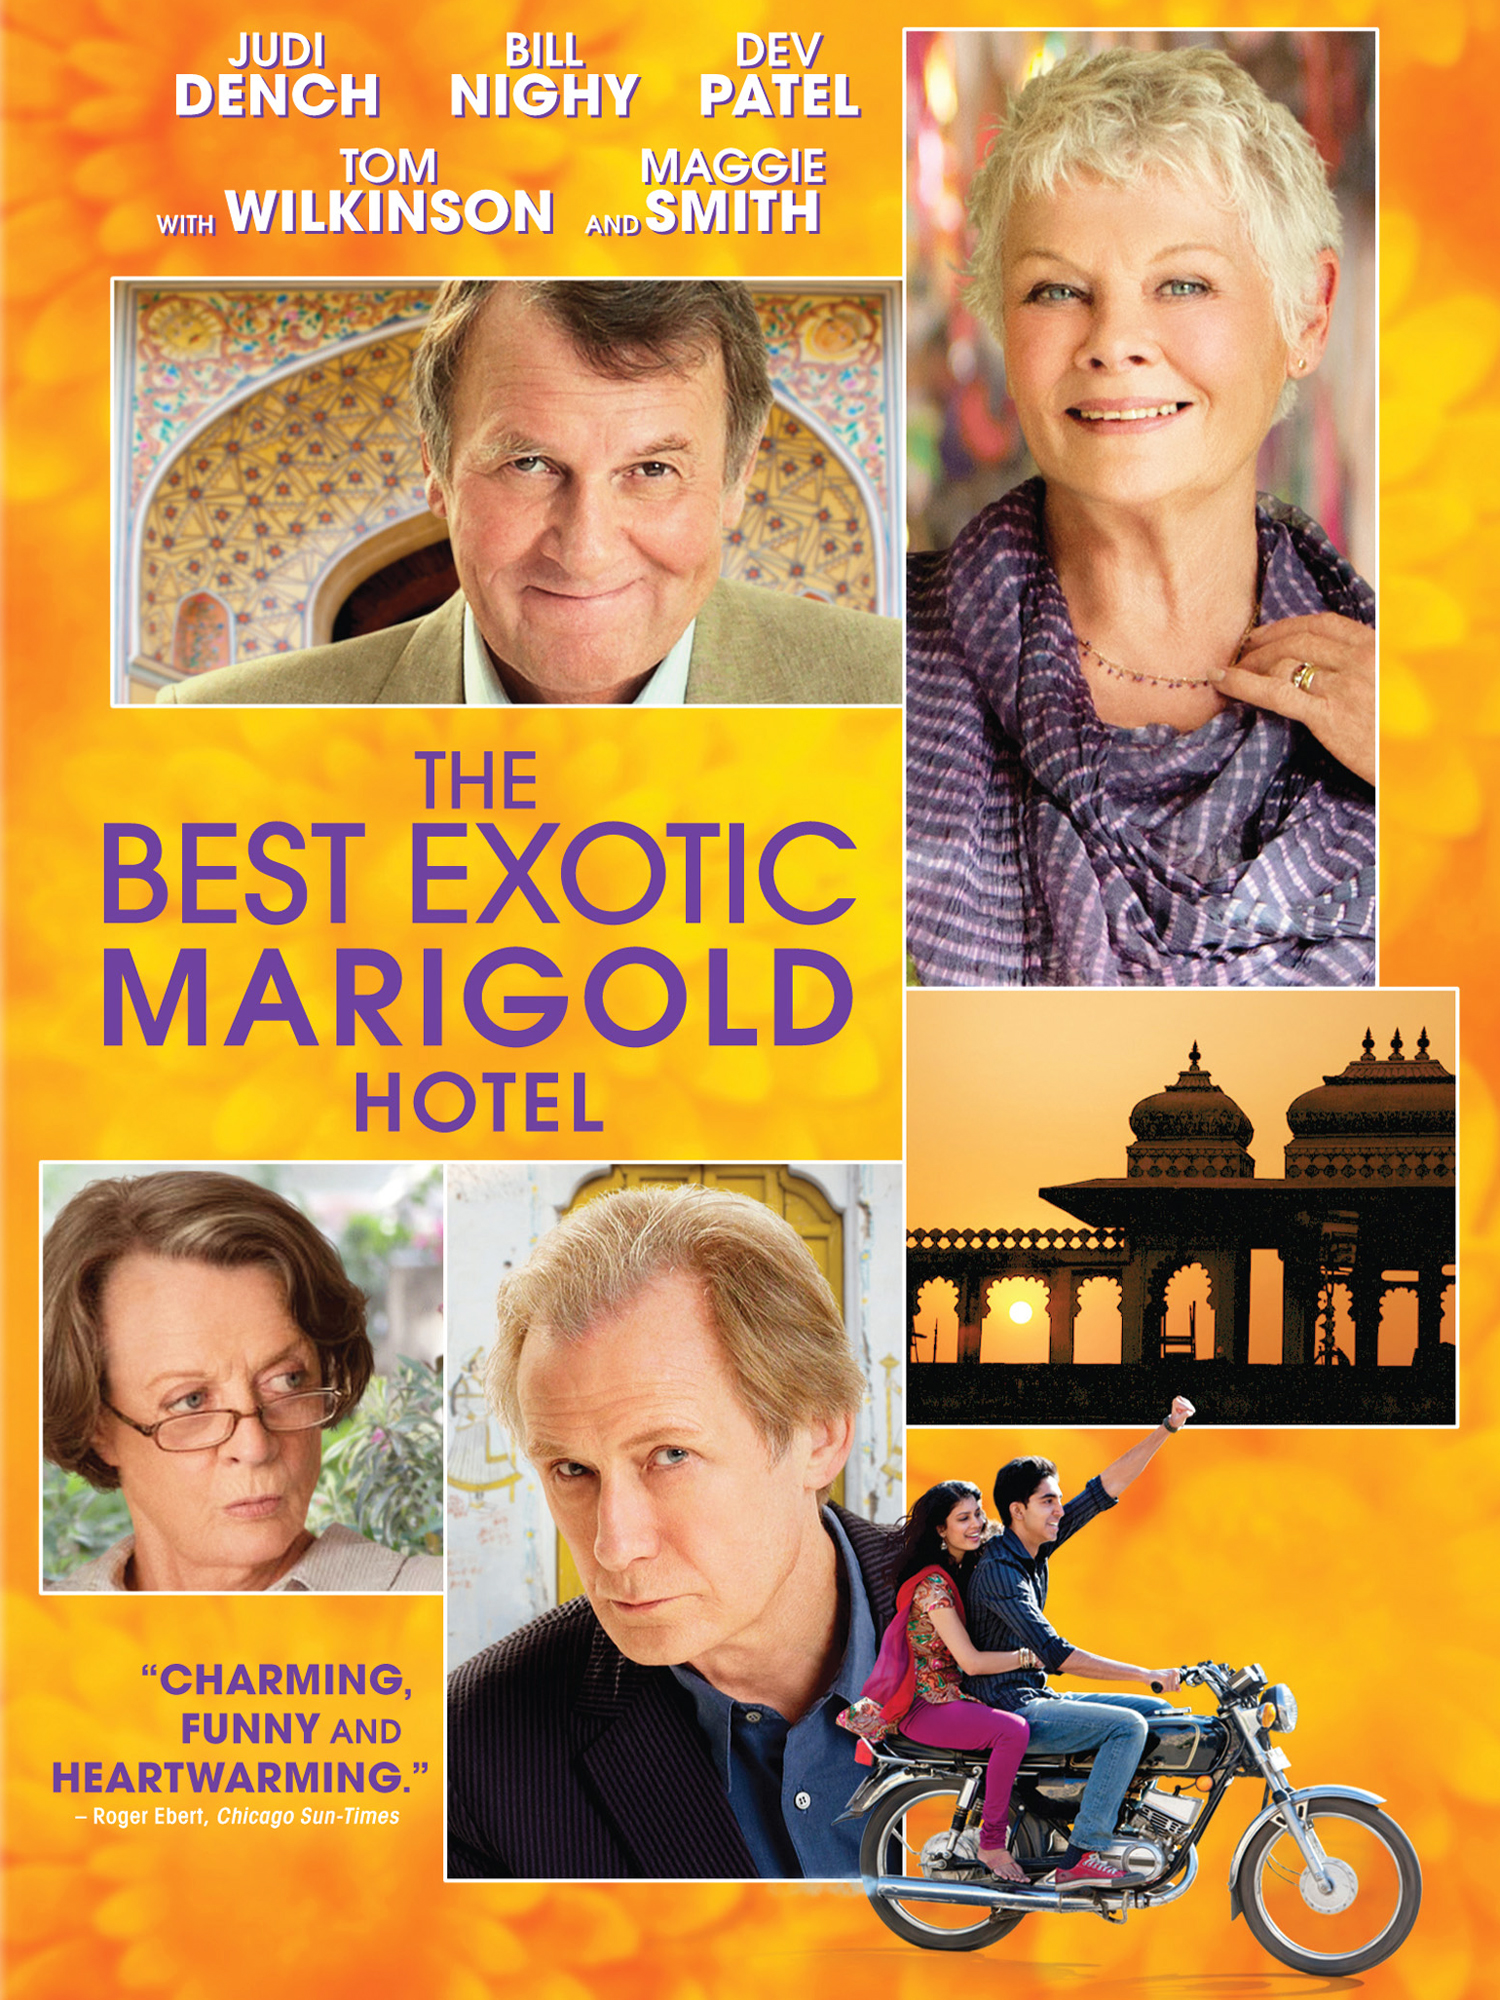 tour of best exotic marigold hotel